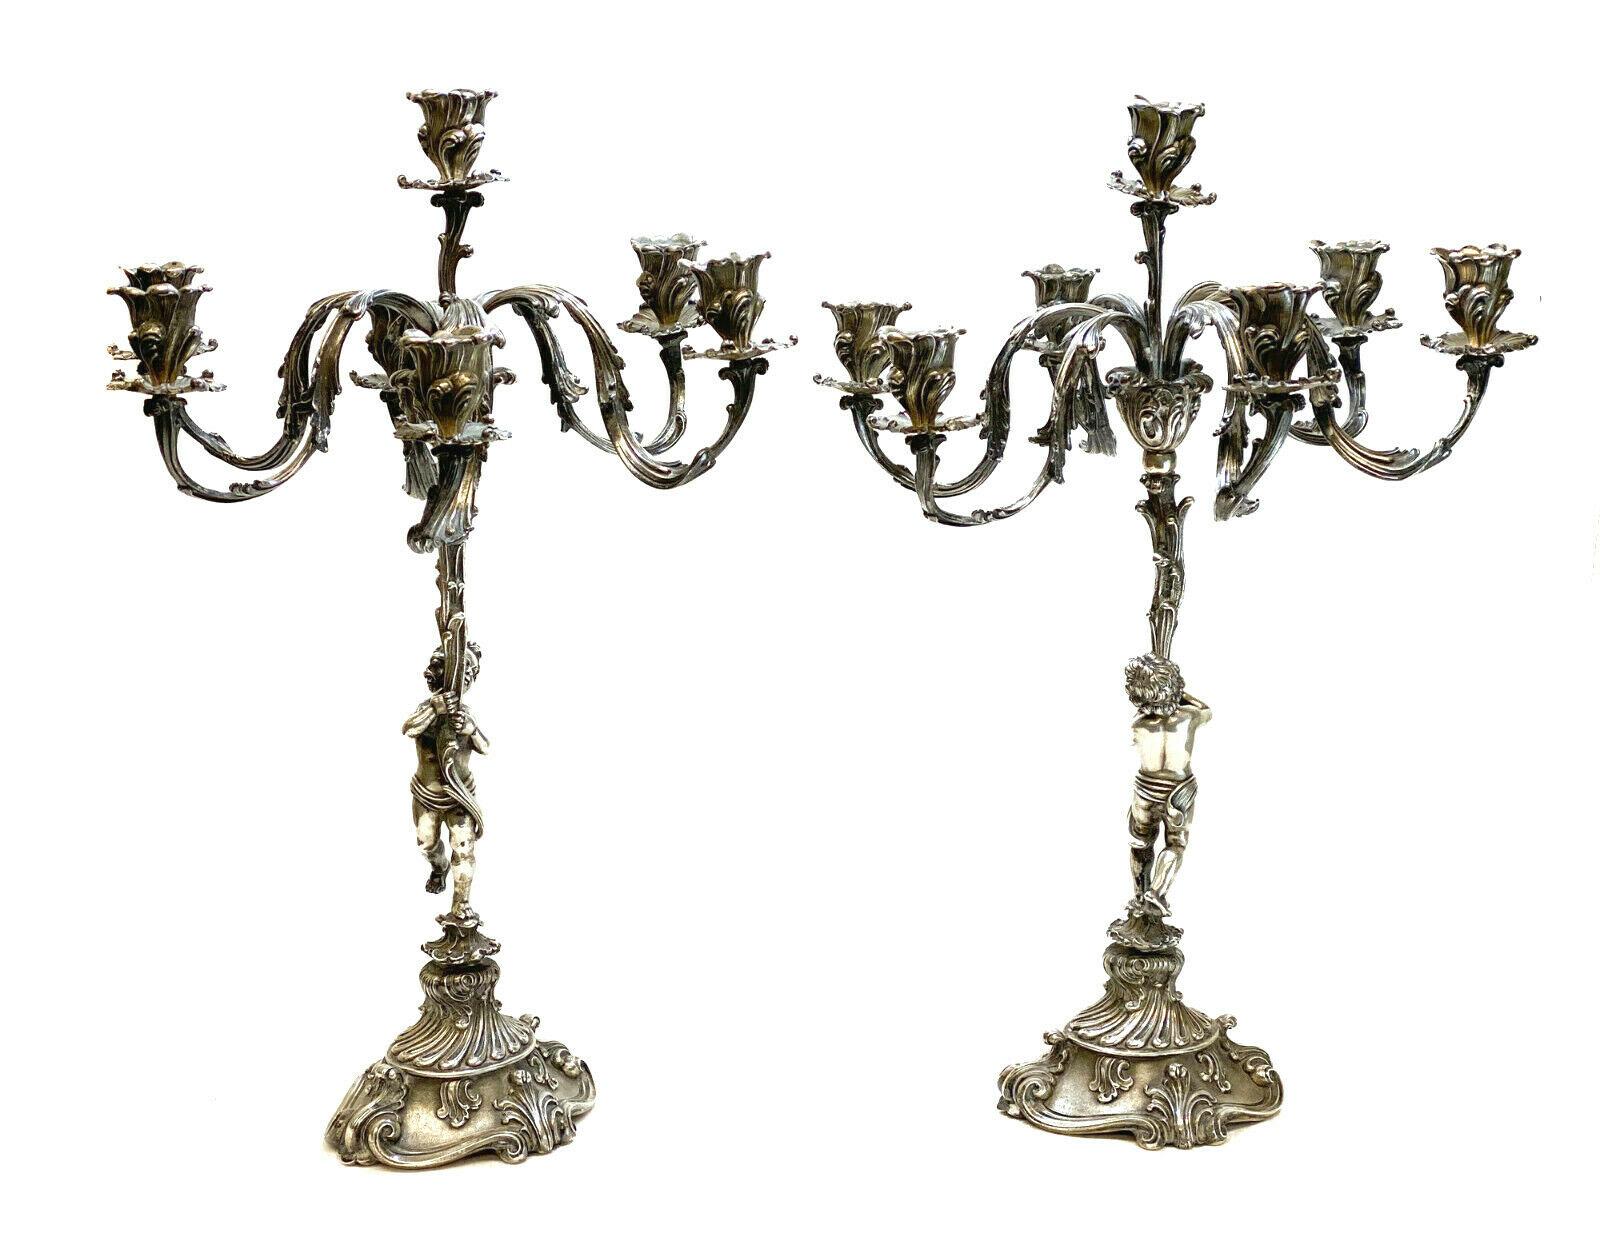 Buccellati Italian sterling silver 7-light candelabras, circa 1950. Figural cherubs to the stem. Hand chased flowers and foliate accents throughout. Marked 